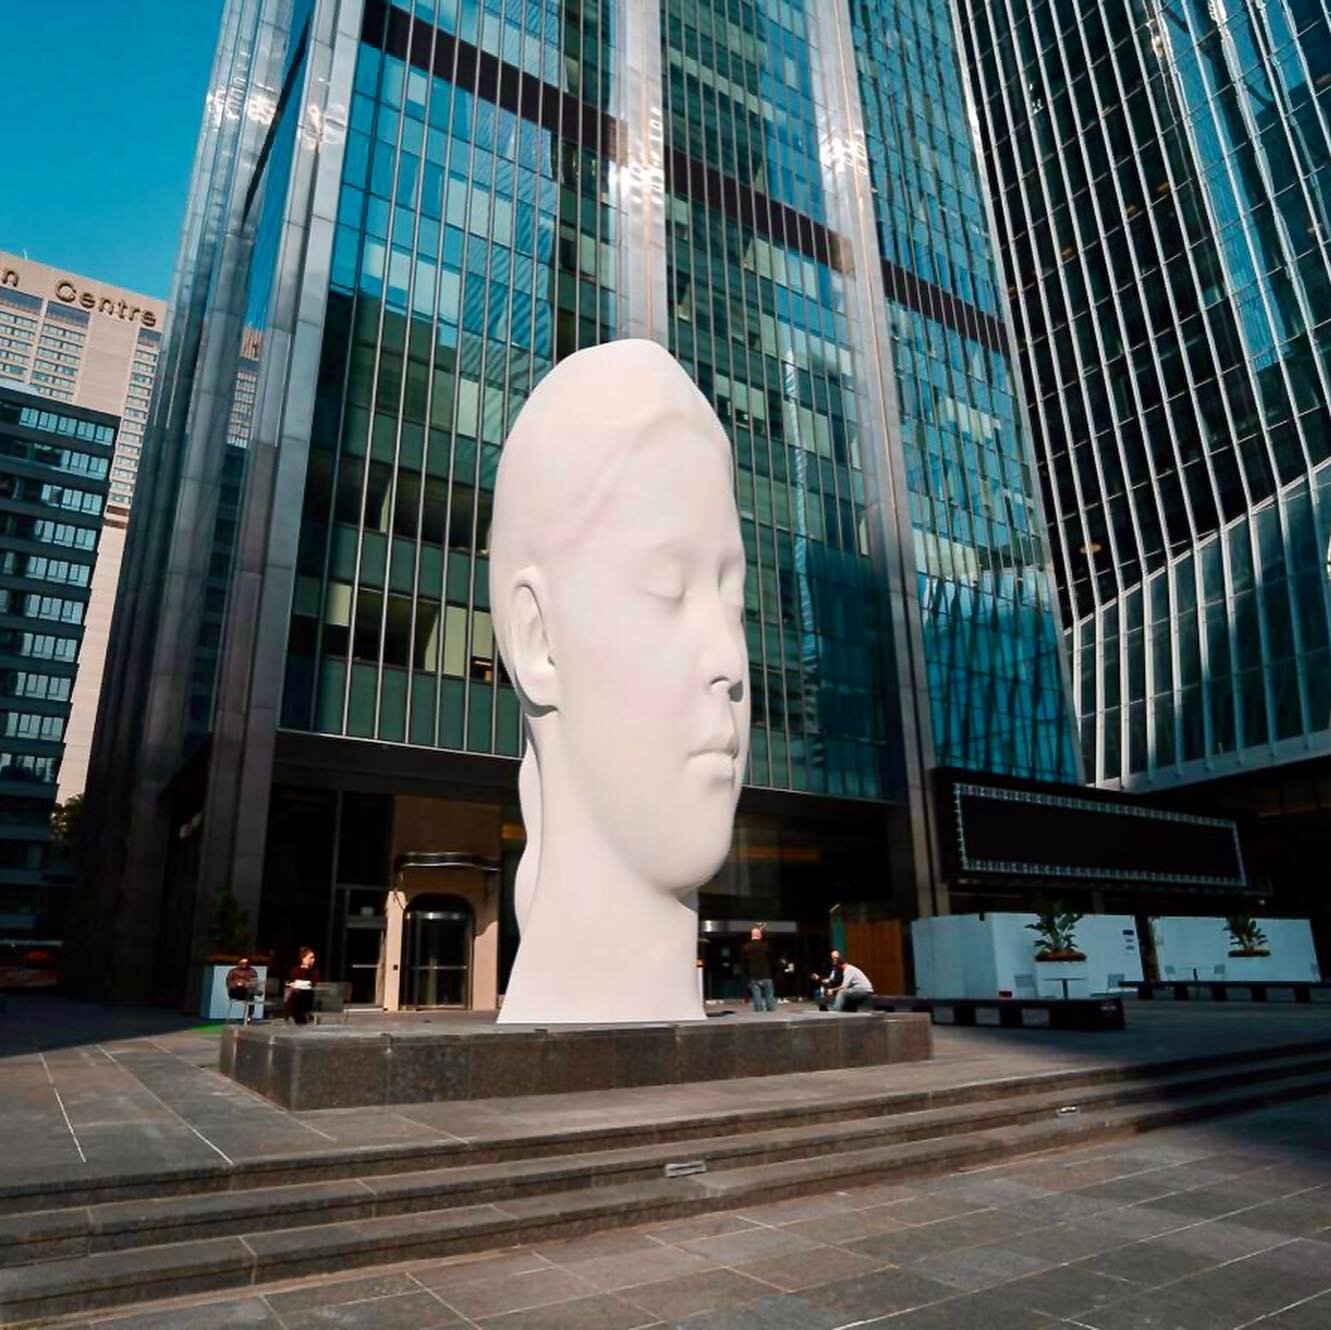 Turning Sculptures into Masterpieces, One Stroke at a Time❗️👨🏻&zwj;🎨 

Your Dream Projects, Painted to Perfection by Us. 🎨✨

Check out the &ldquo;Dreaming&rdquo; sculpture designed by world renowned sculptor Jaume Plensa. We had the amazing oppor